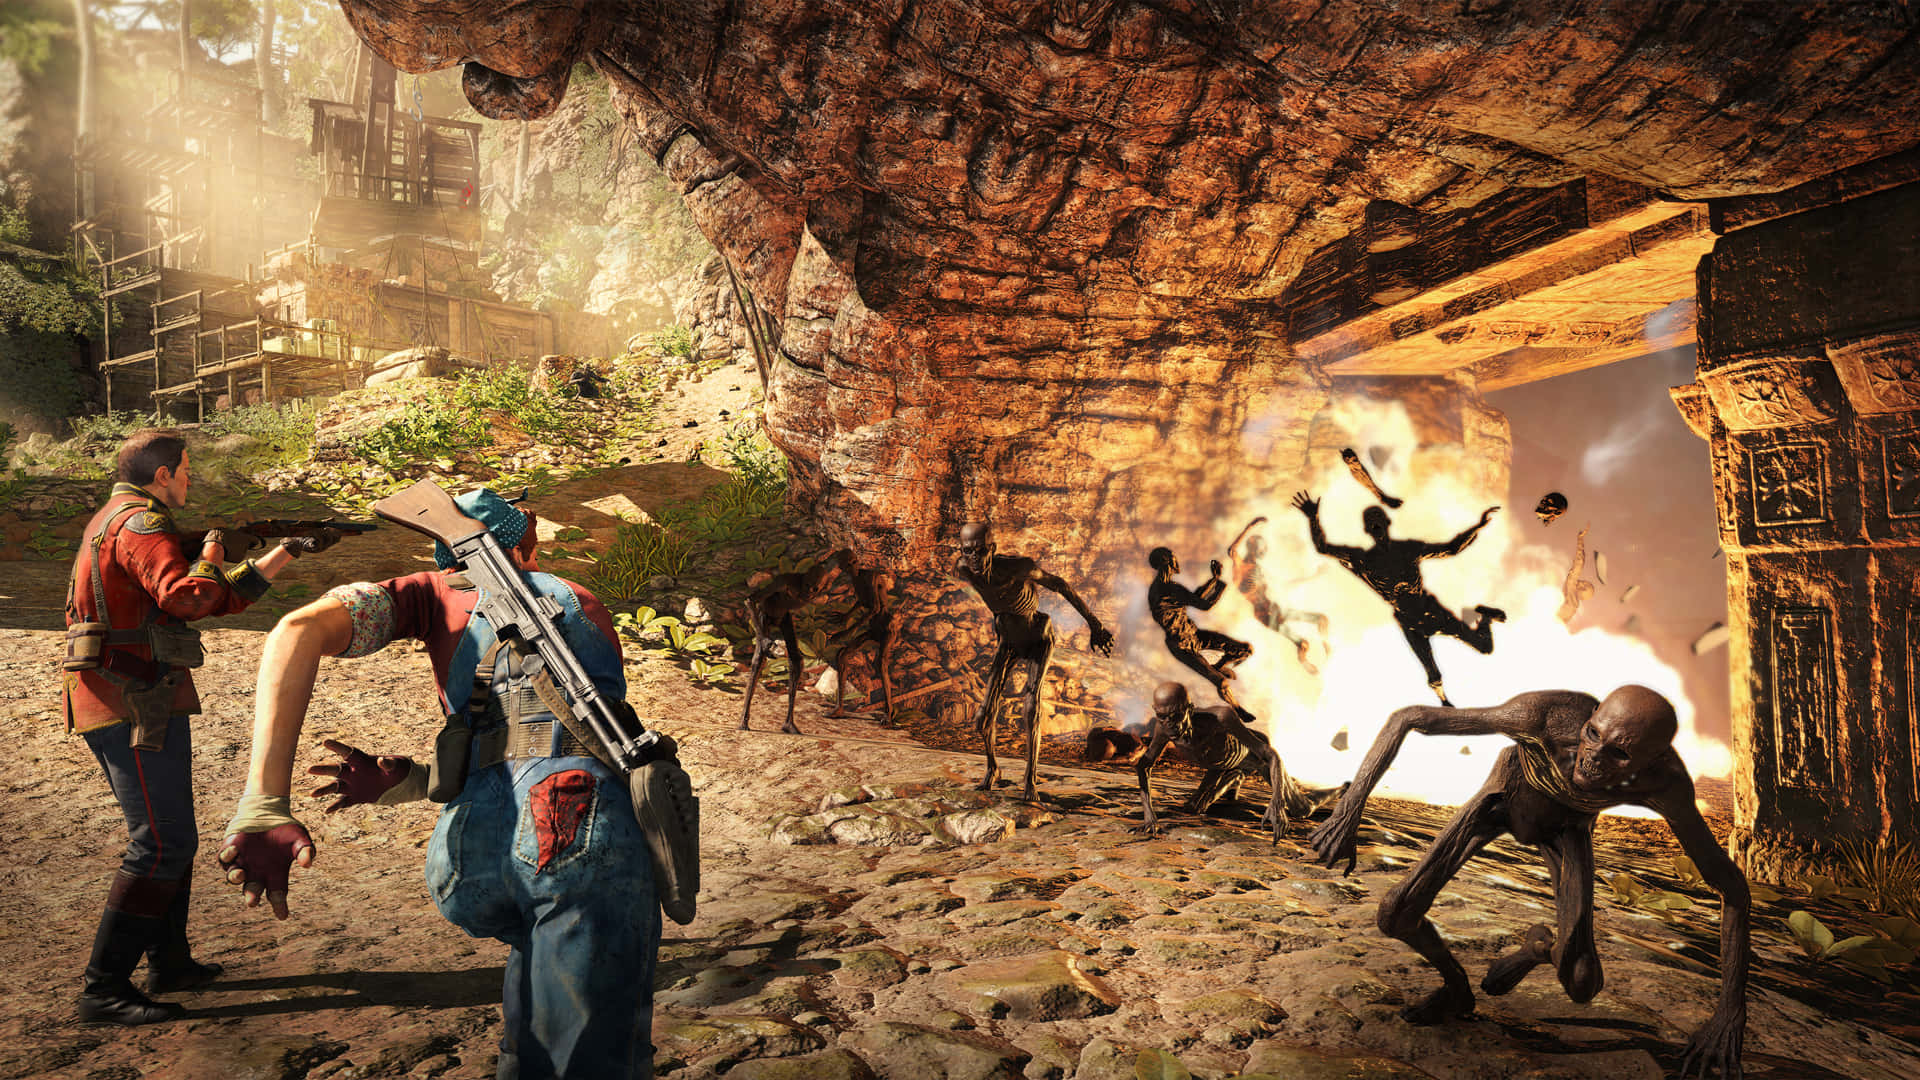 A Screenshot Of A Video Game With People In A Cave